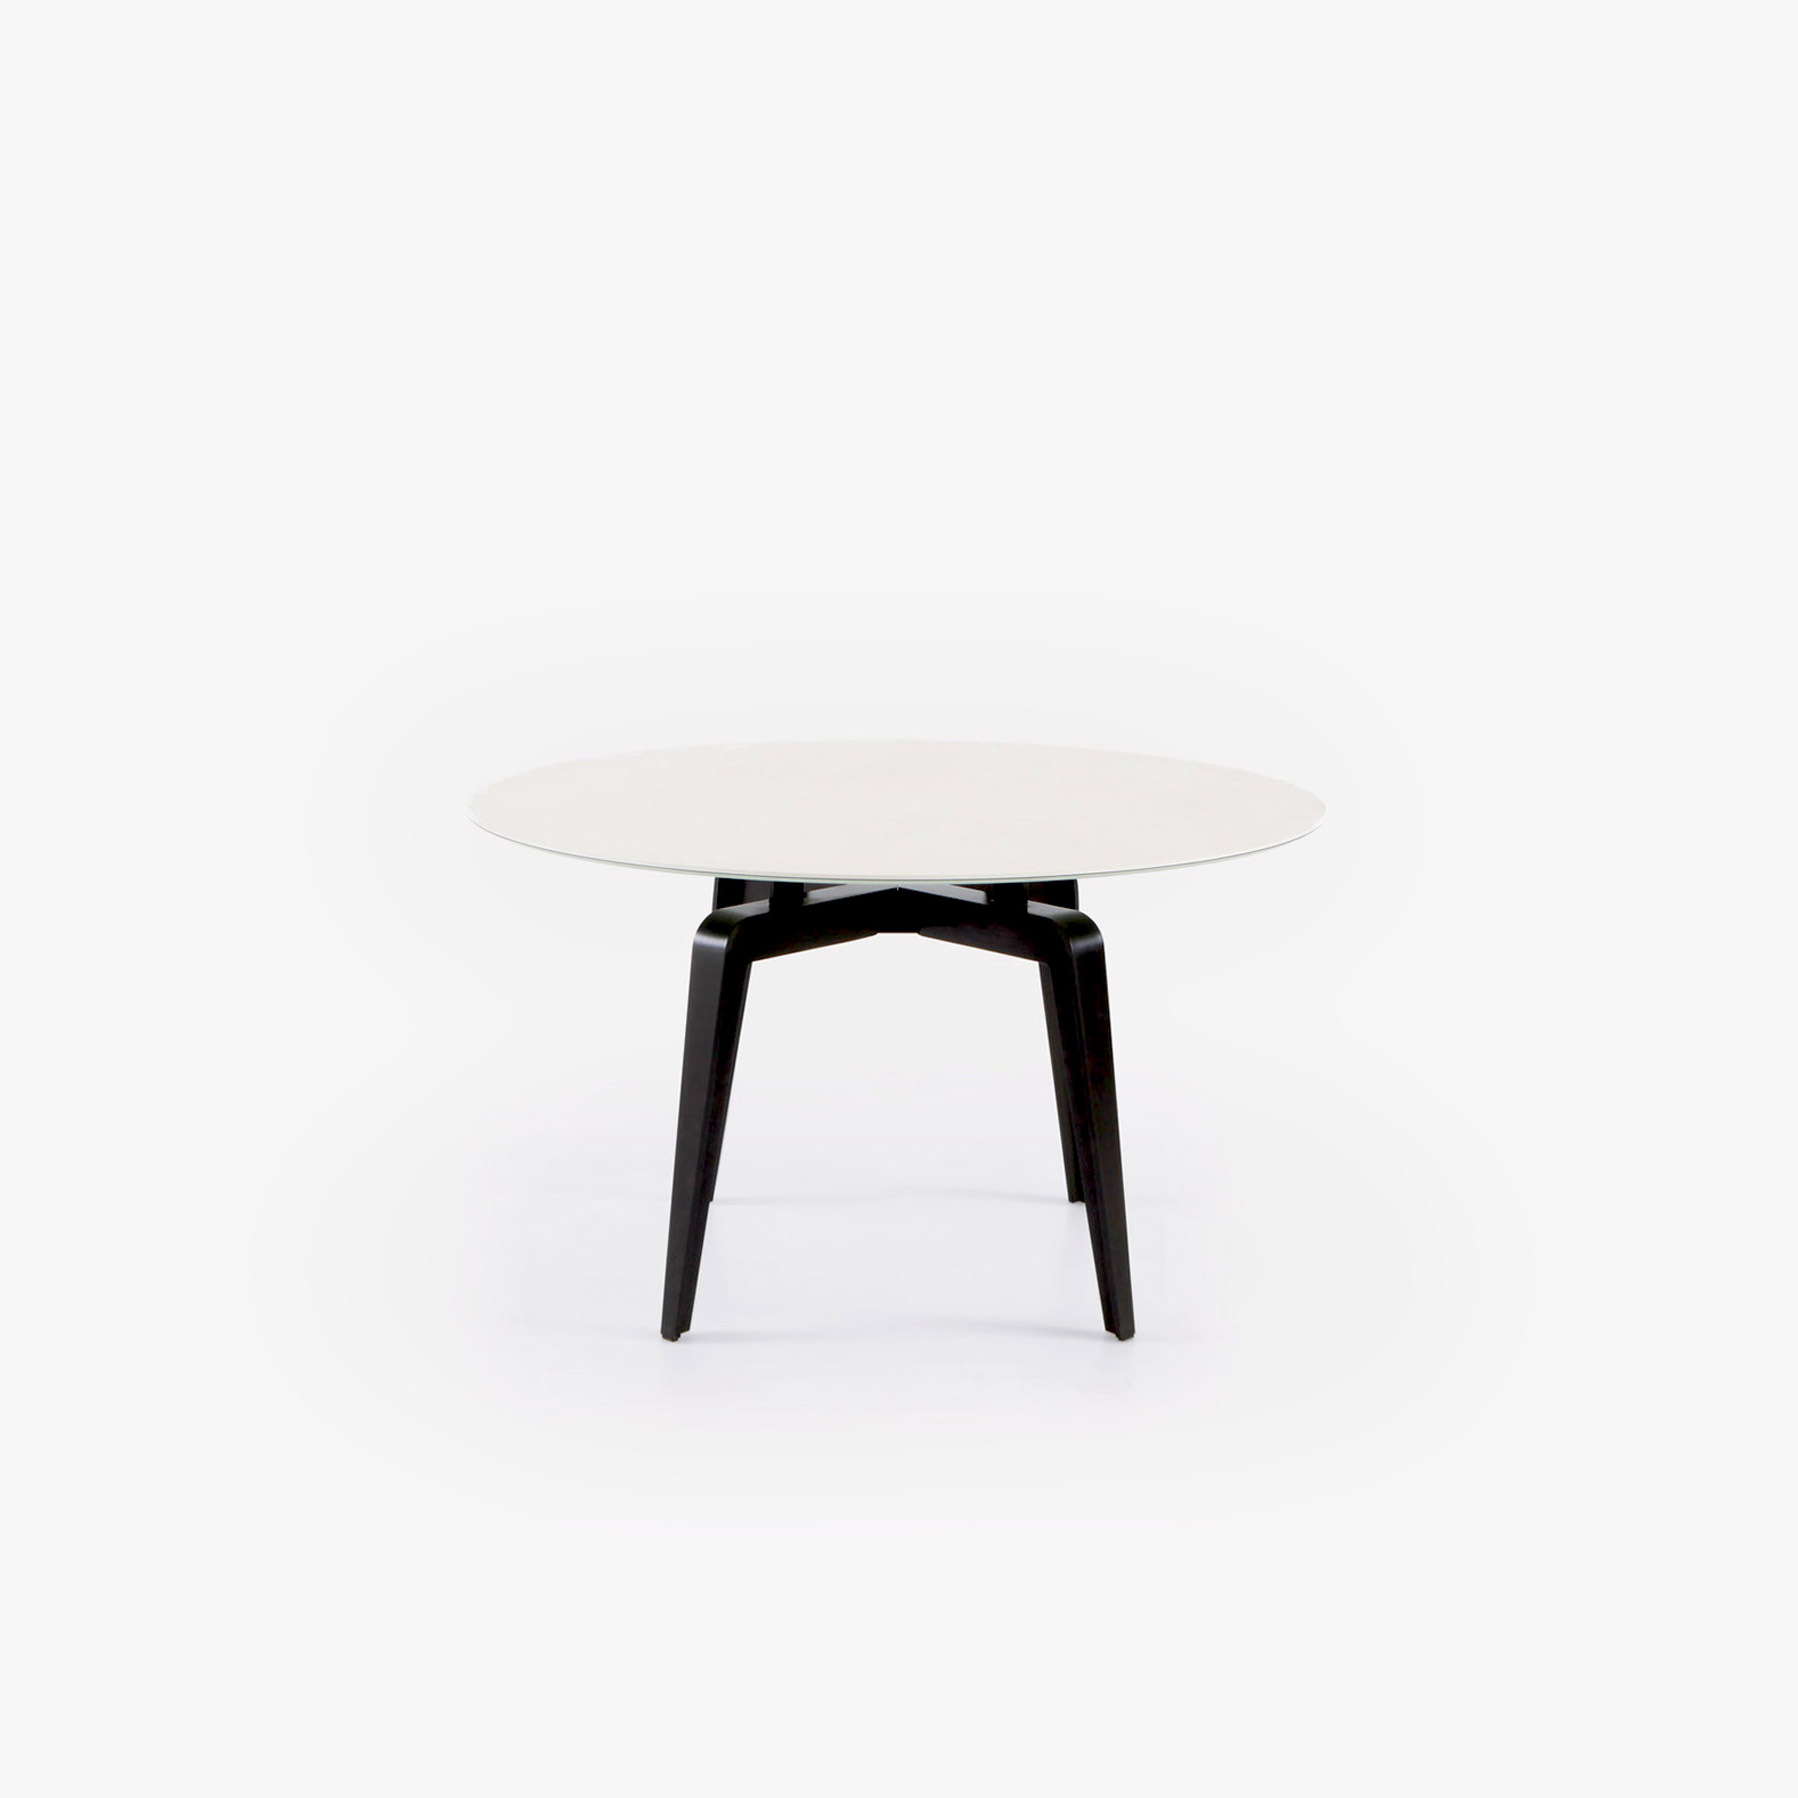 Image ROUND DINING TABLE BLACK LACQUERED BASE 